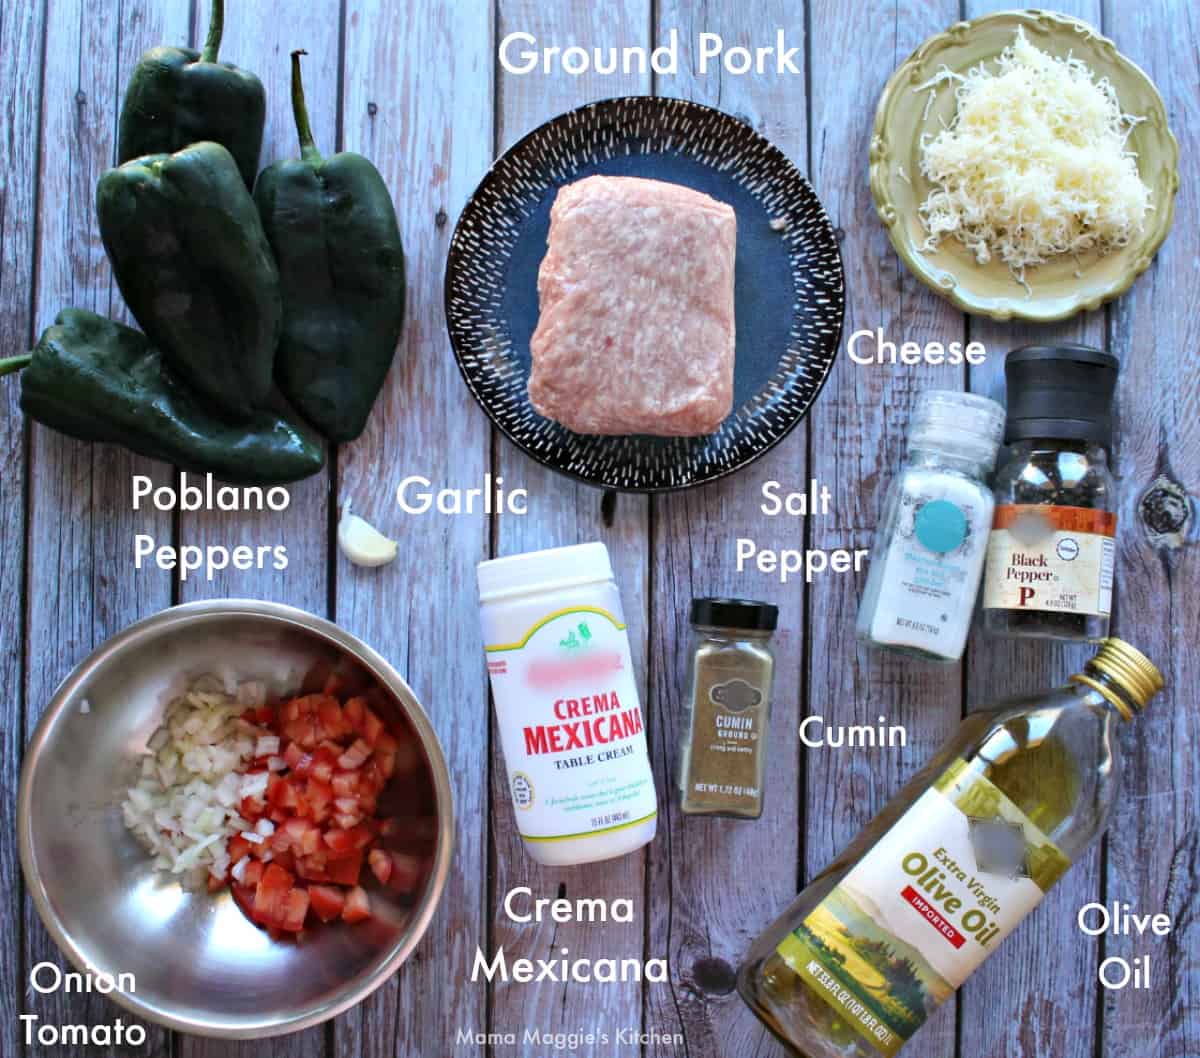 All the ingredients to make pork chile rellenos labeled and laid out.